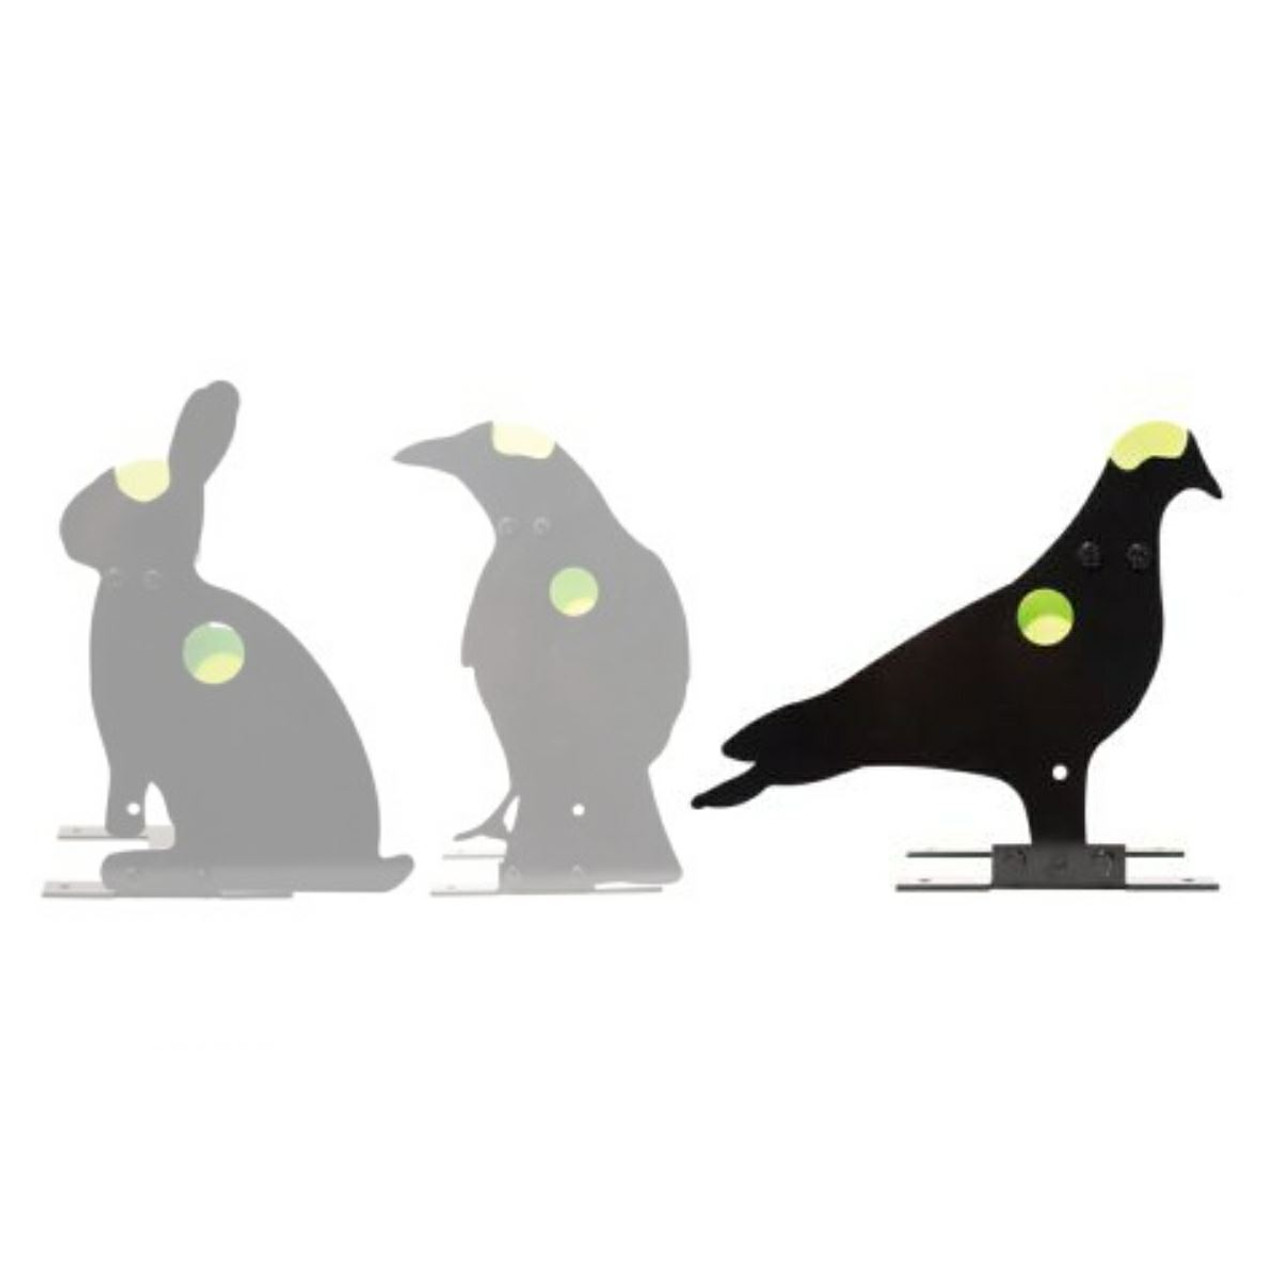 Gr8fun Kill Zone Targets Pigeon Dove Metal Silhouette with resetting paddles